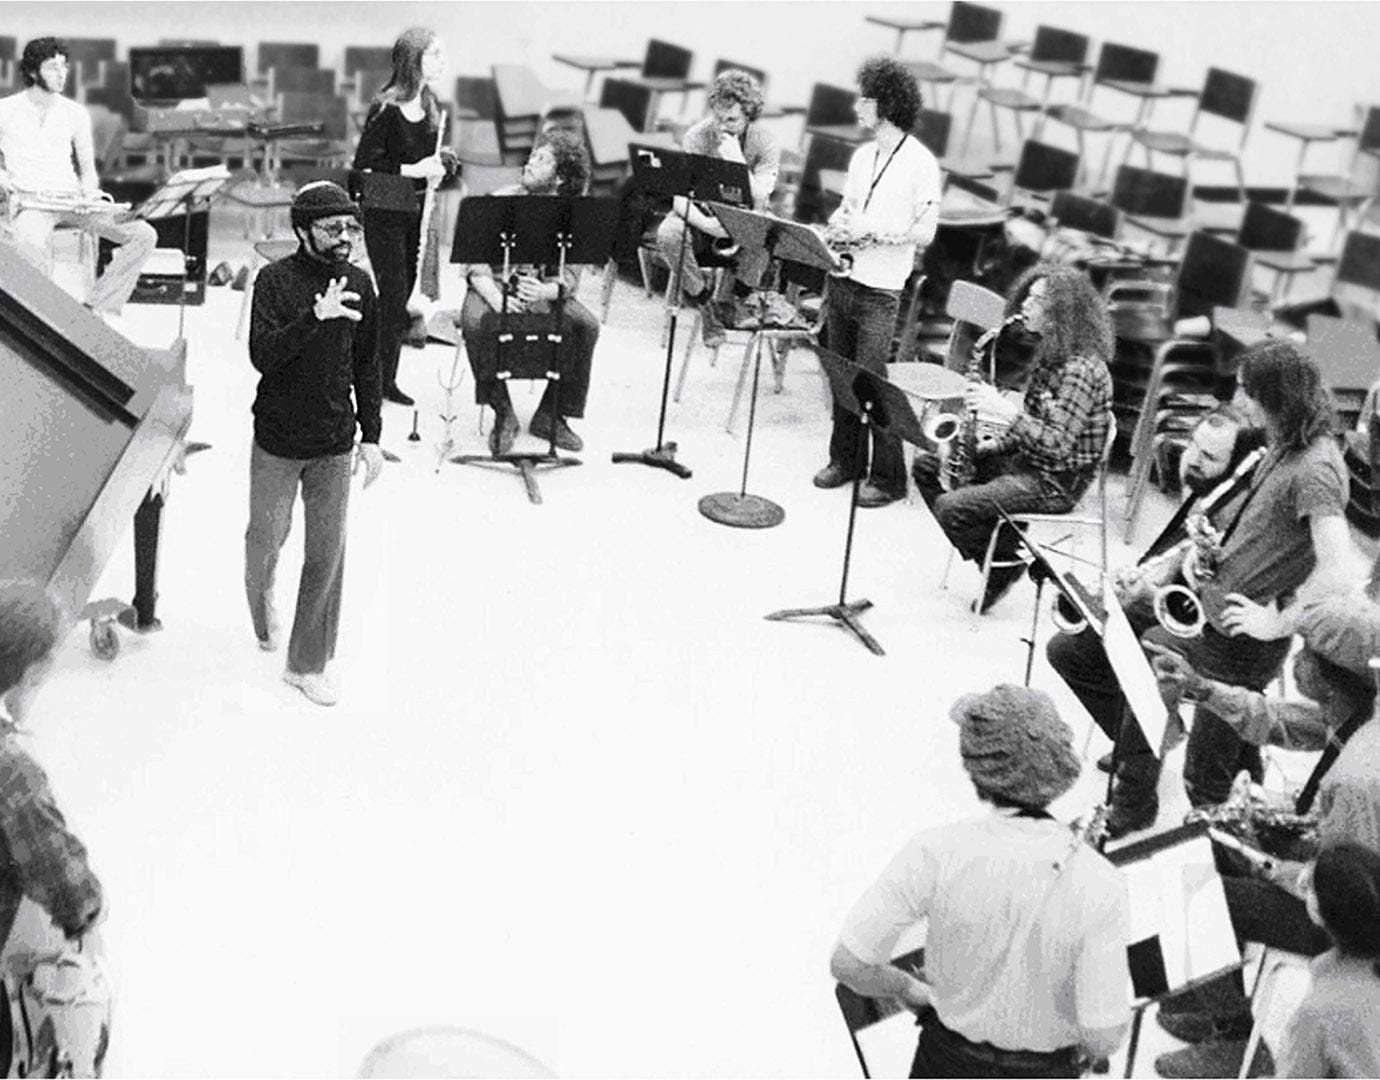 Cecil Taylor & student musicians, University of Wisconsin, 1971